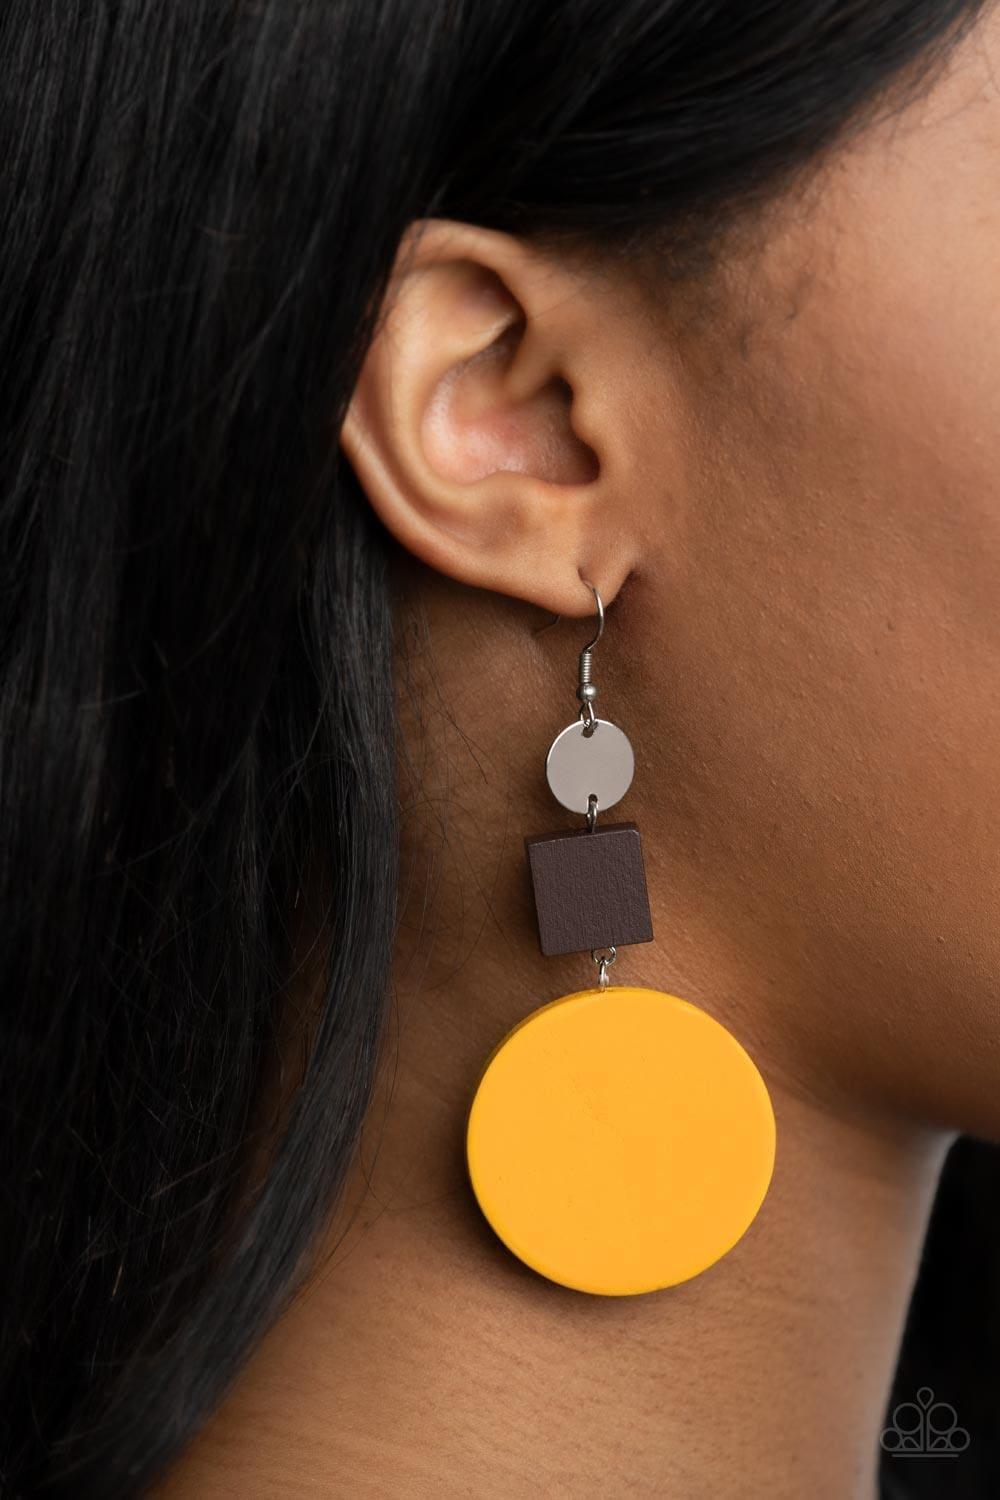 Paparazzi Accessories - Modern Materials - Yellow Earrings - Bling by JessieK